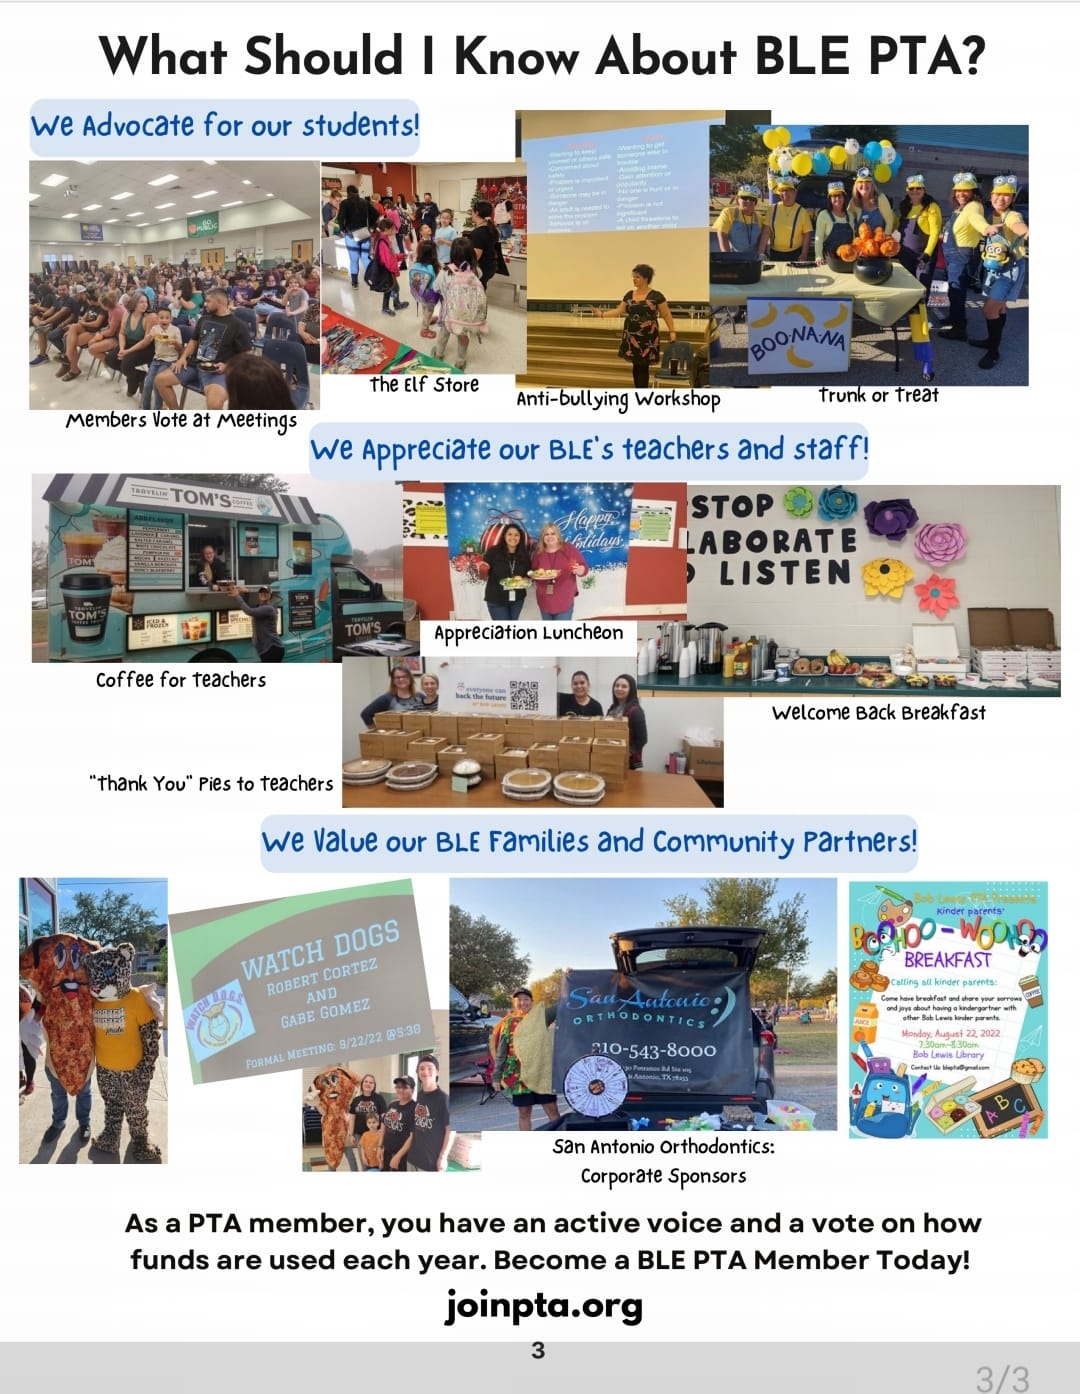 A collage of pictures showing the PTA at work.